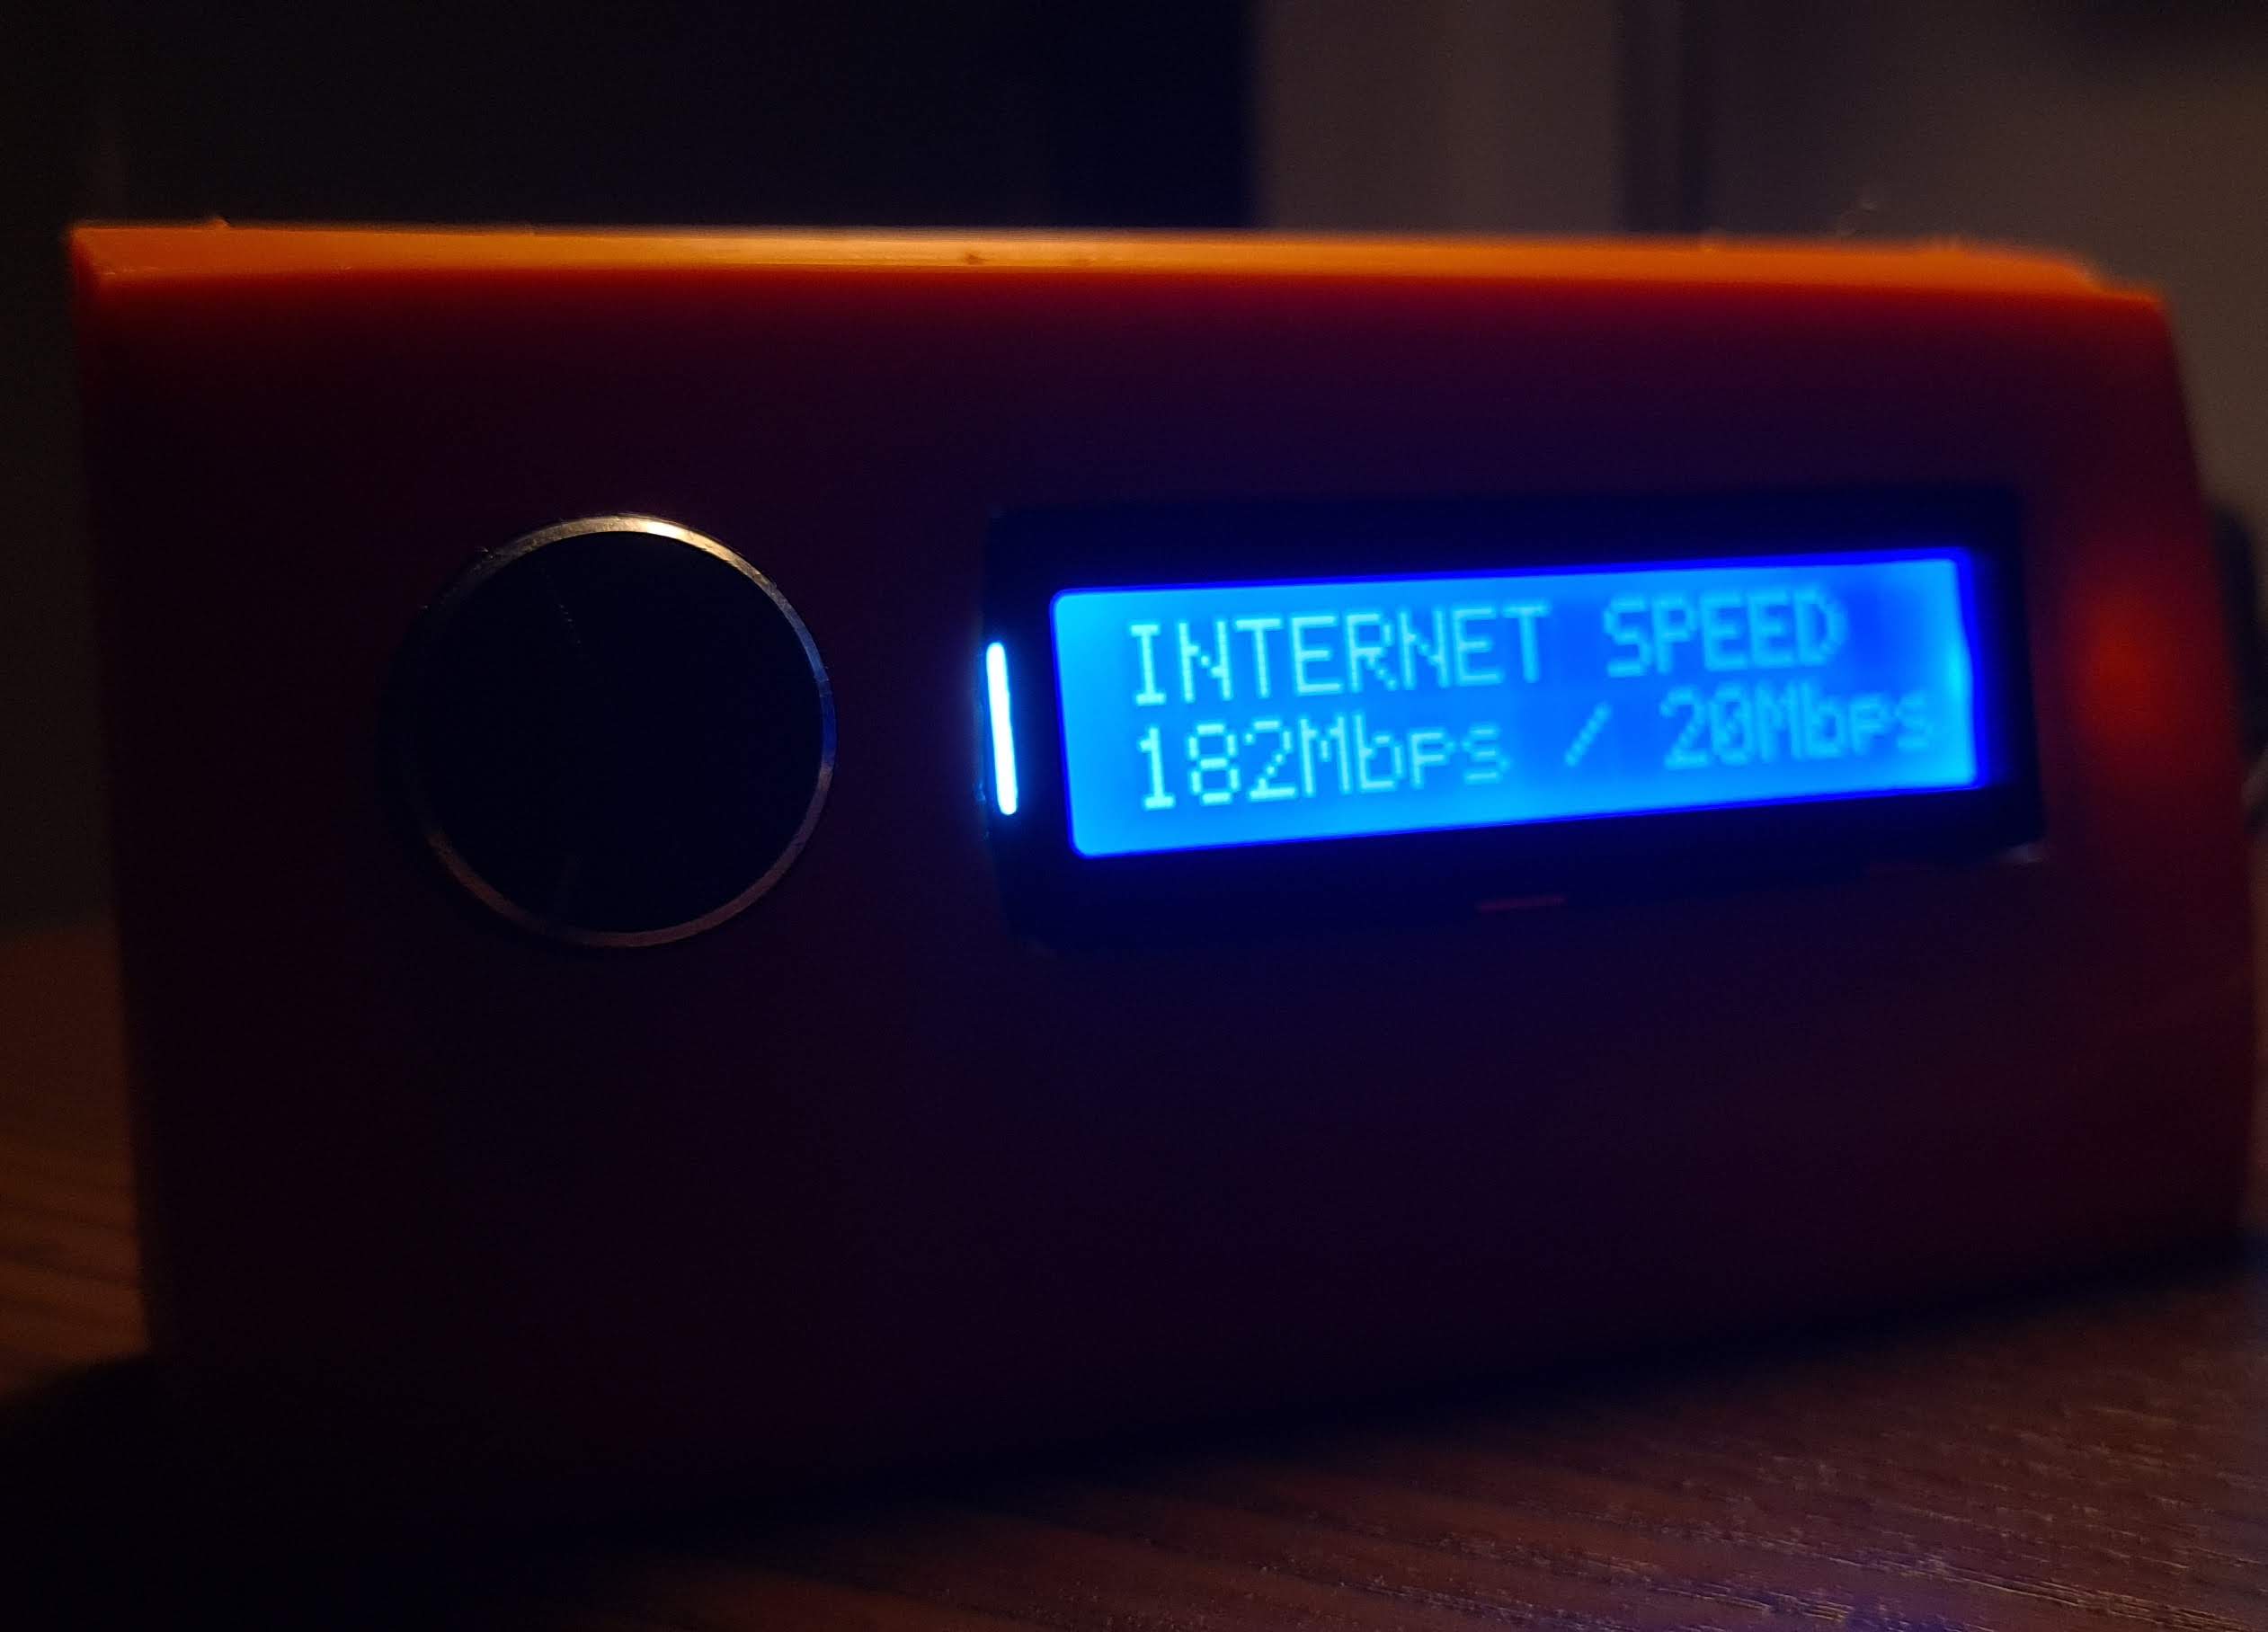 Finished product displaying Internet speed